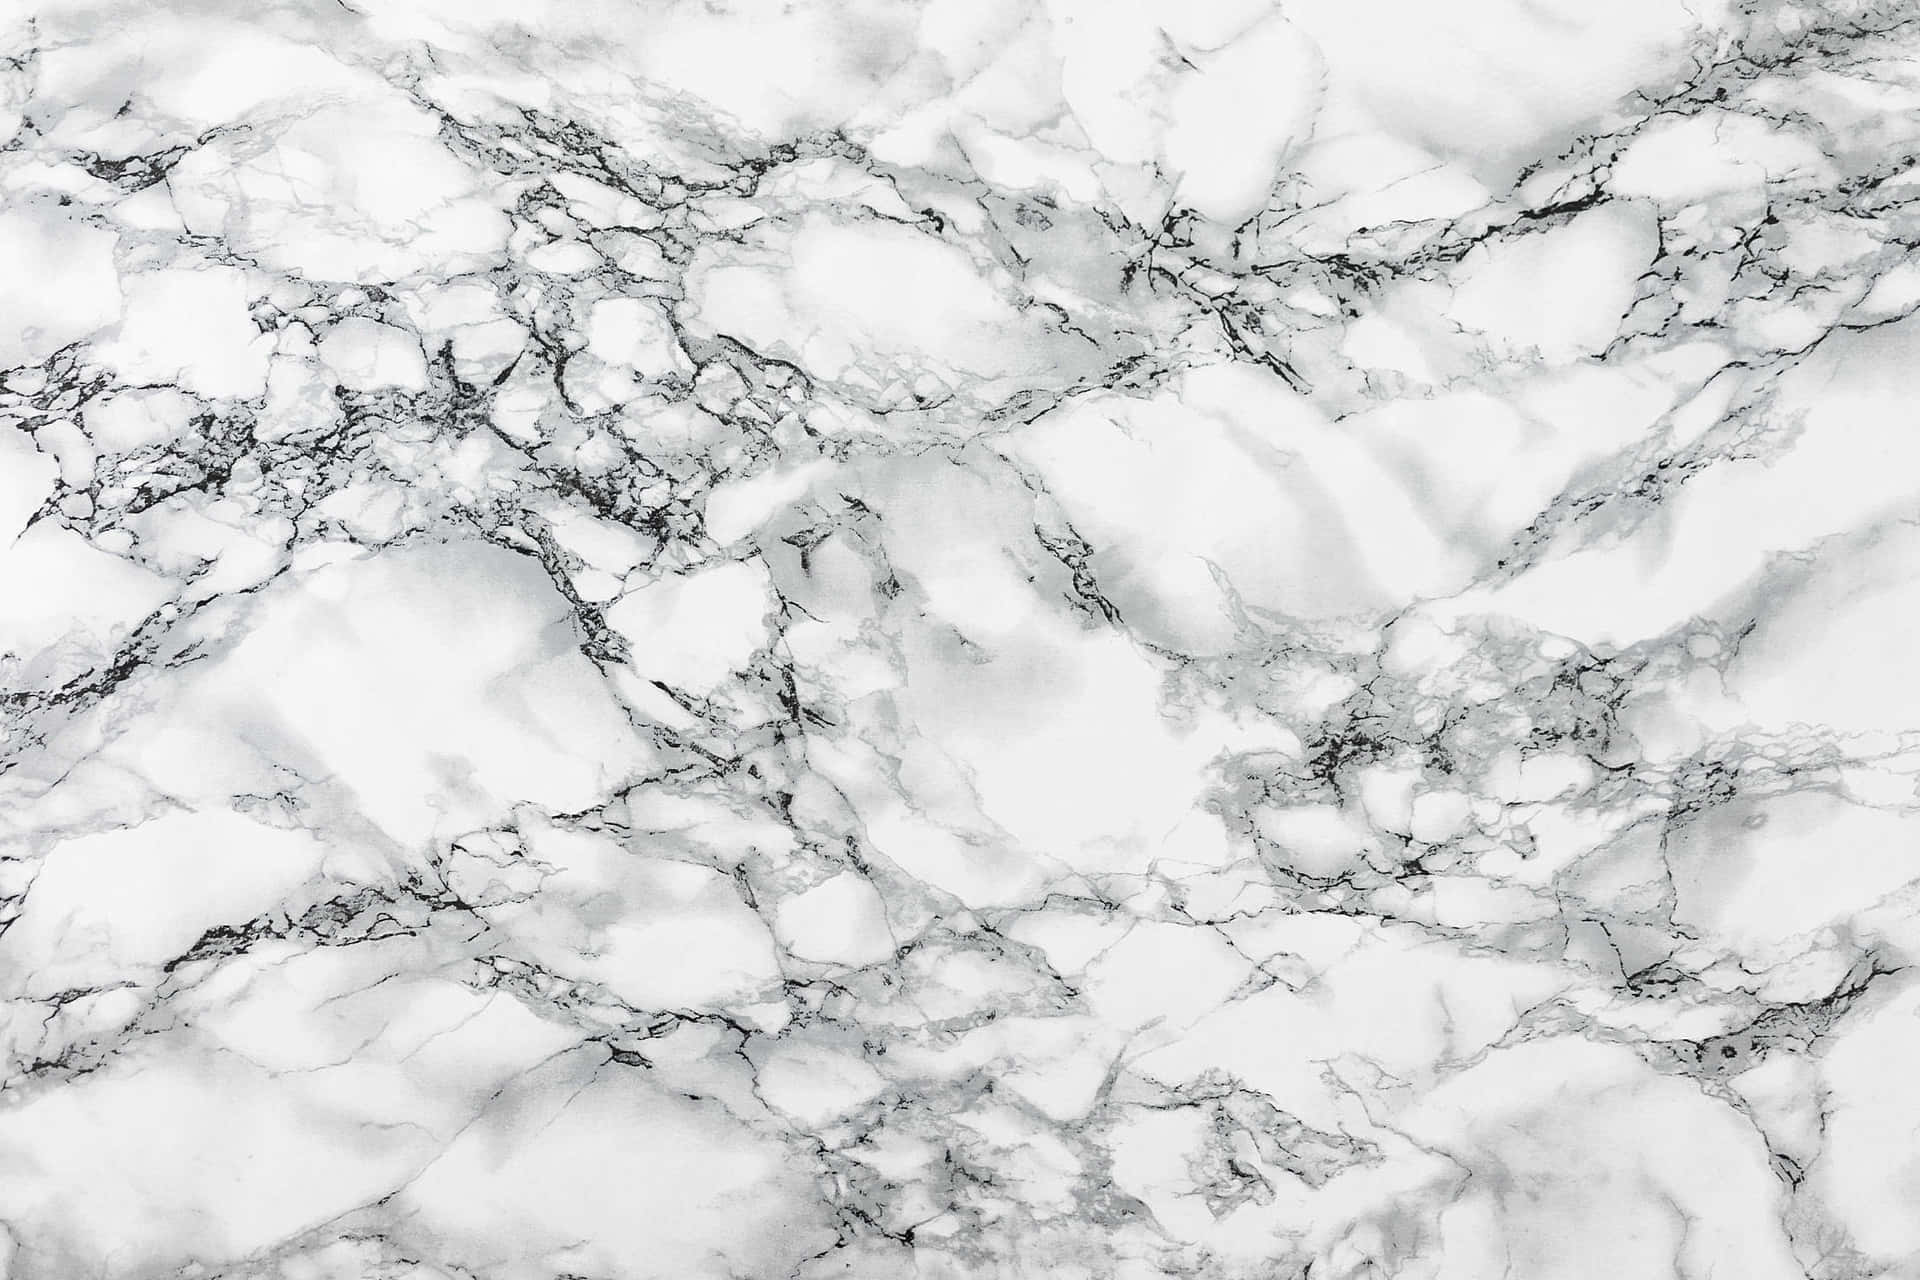 “Glowing White Marble”